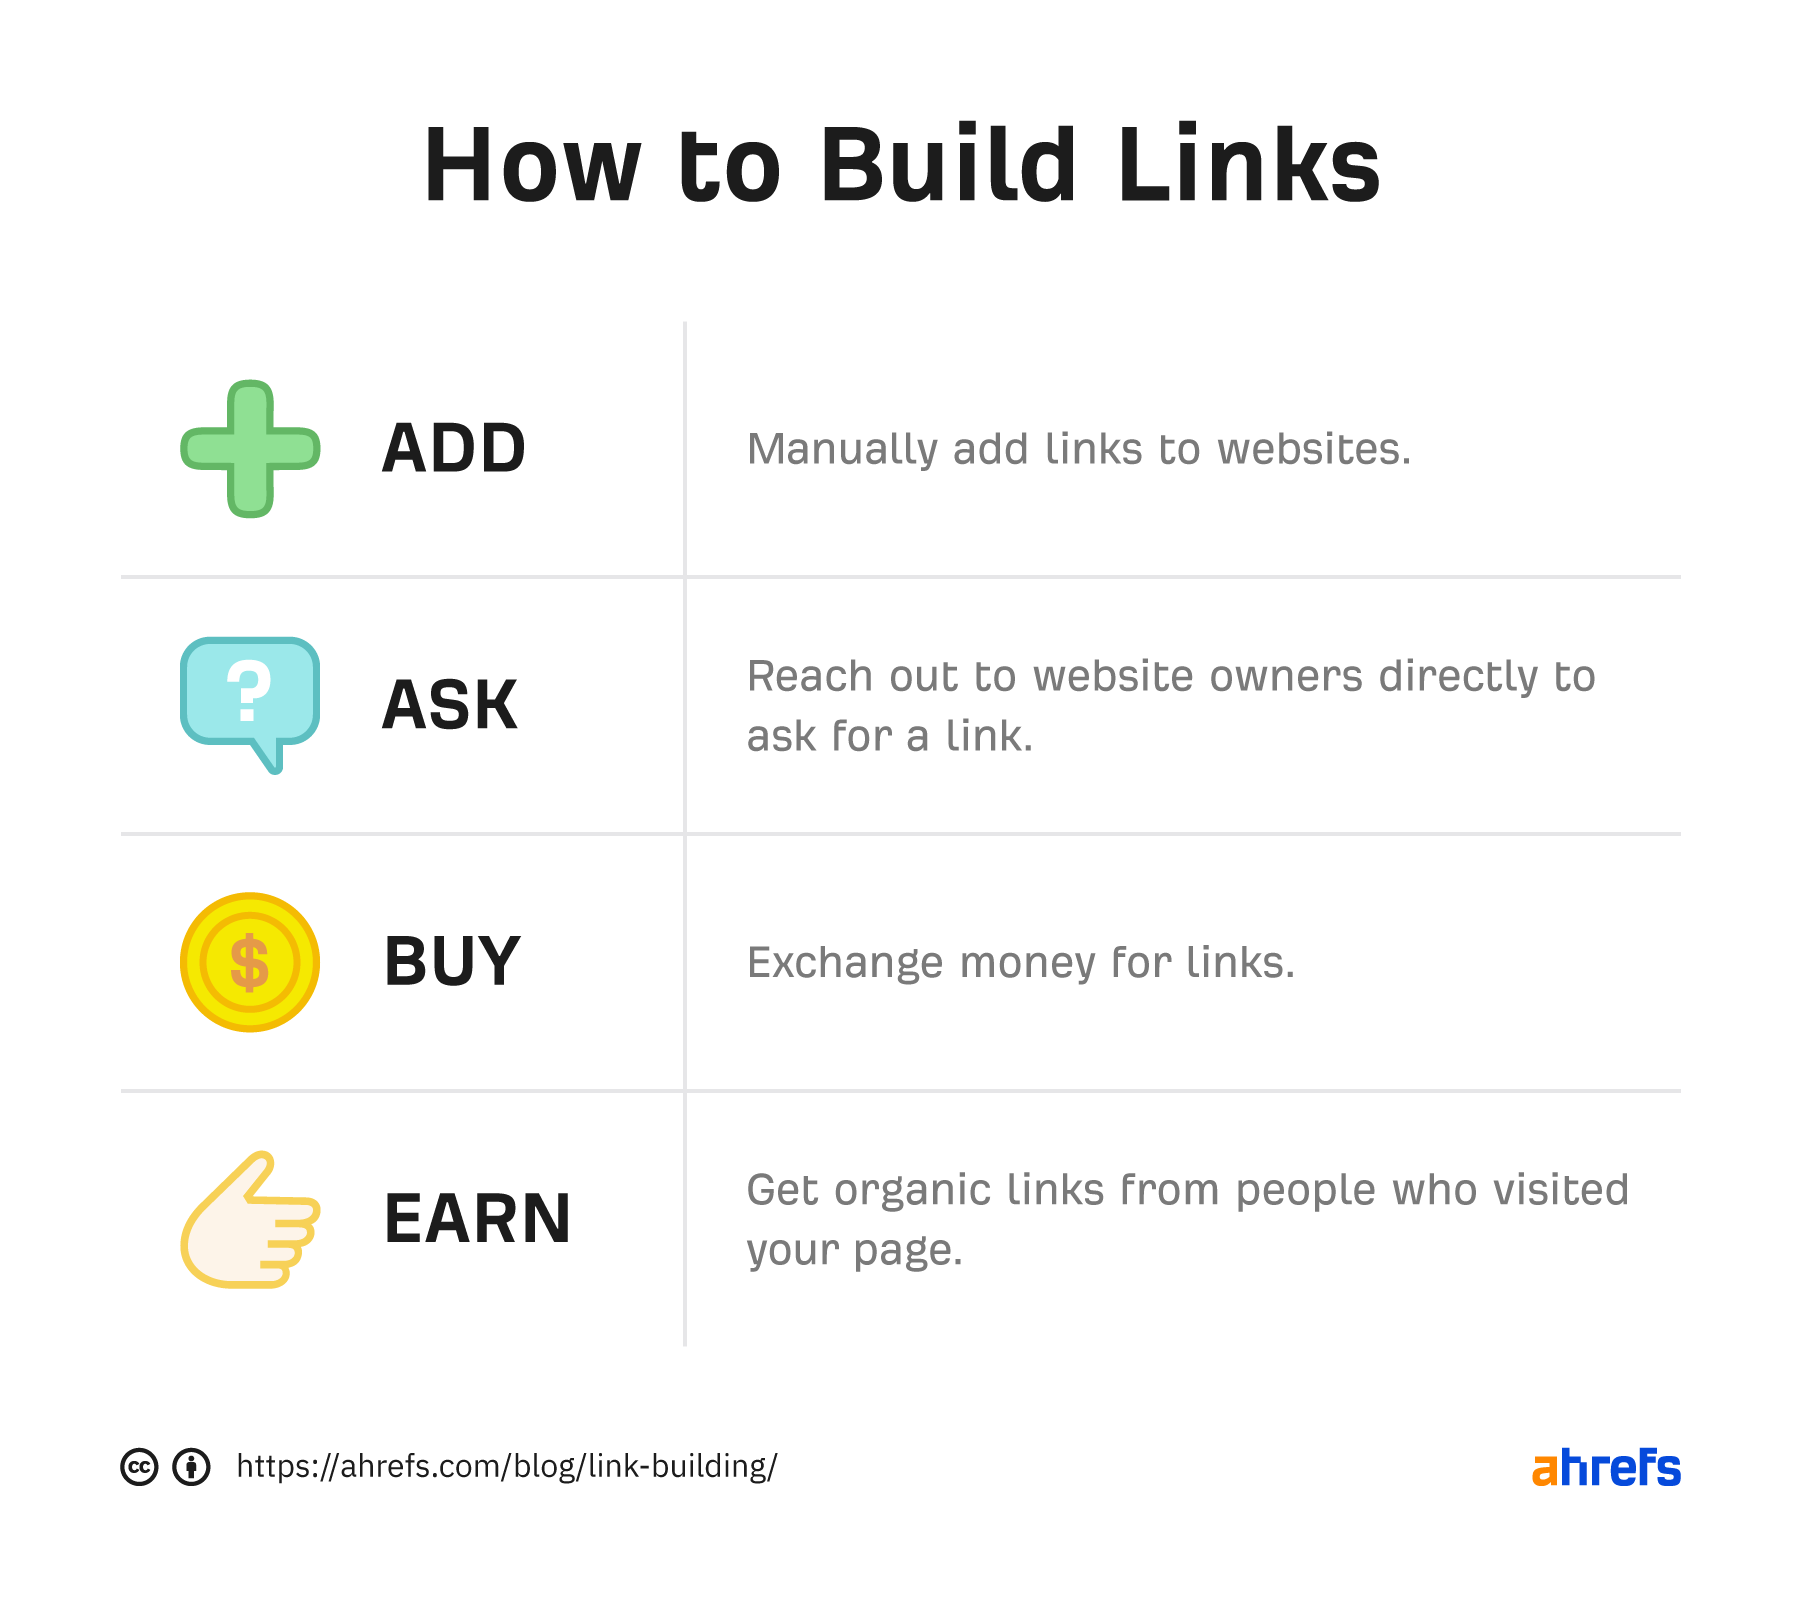 HOW TO BUILD LINKS